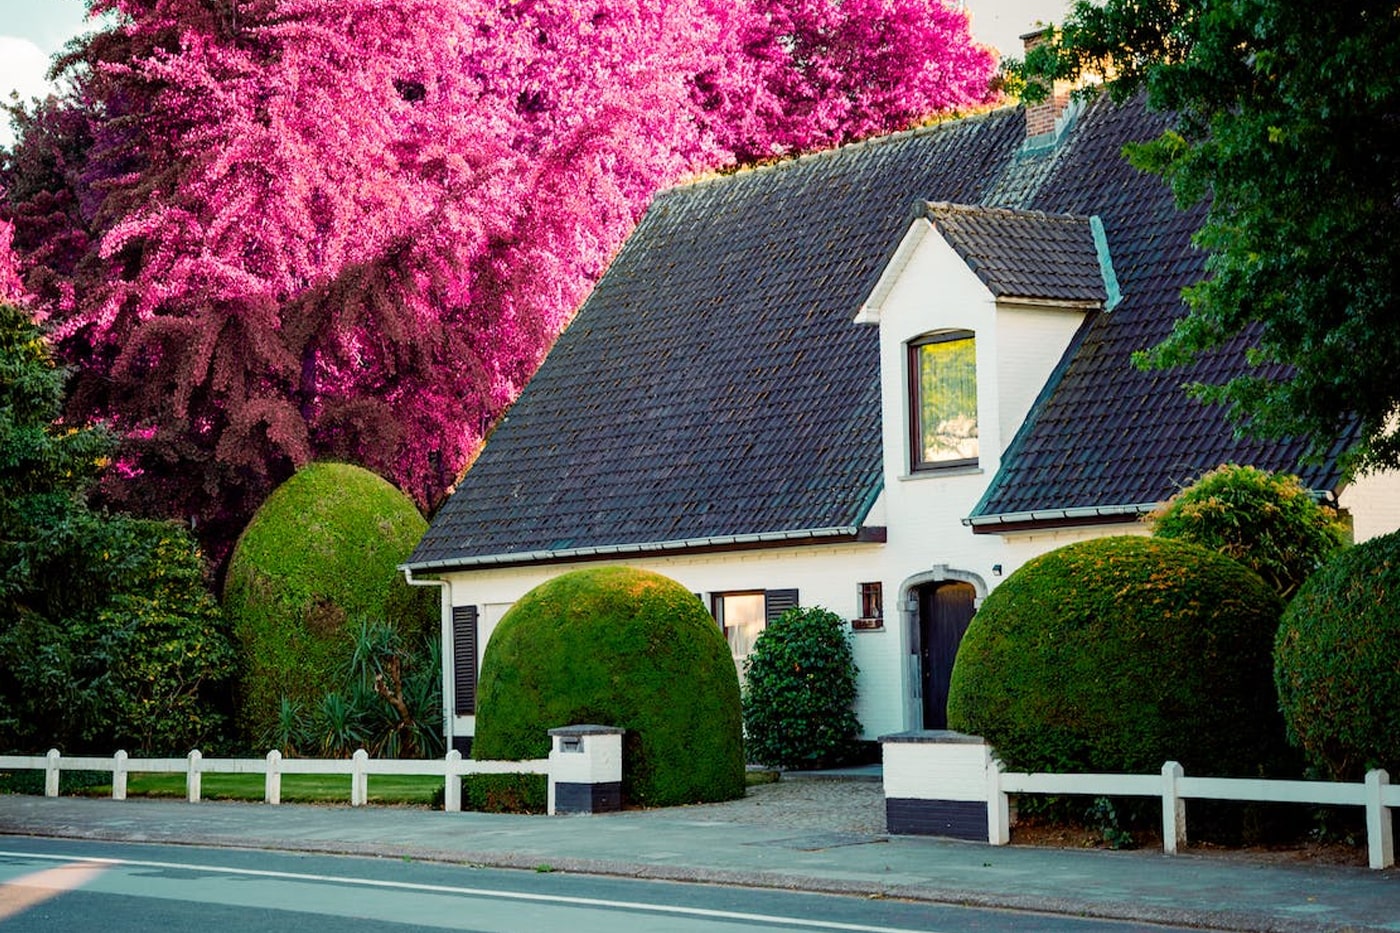 beautiful house with trimmed shrubs and pink tree leaves